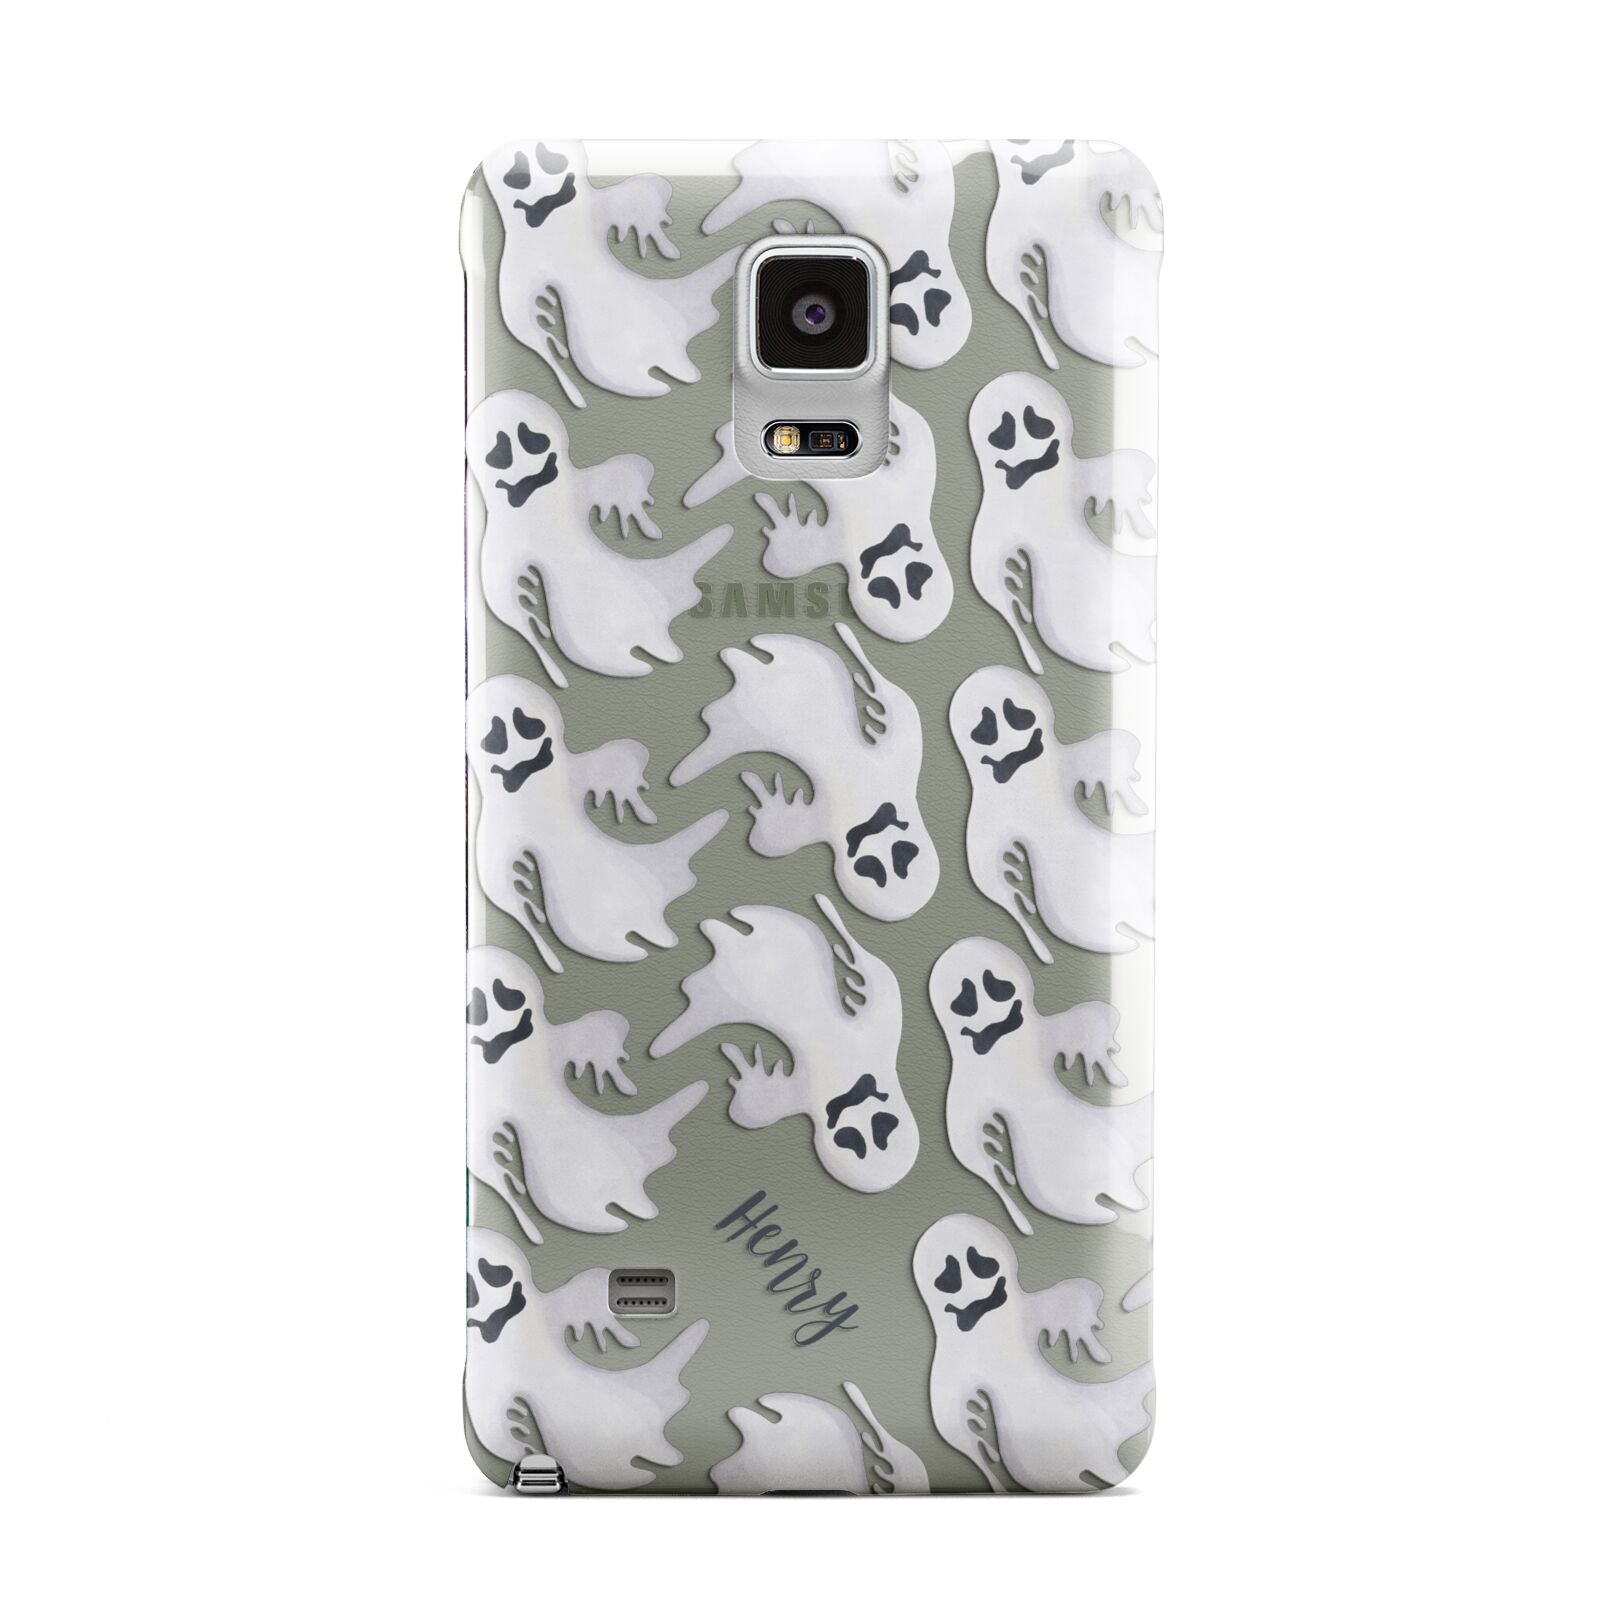 Floaty Ghosts Personalised Samsung Galaxy Note 4 Case